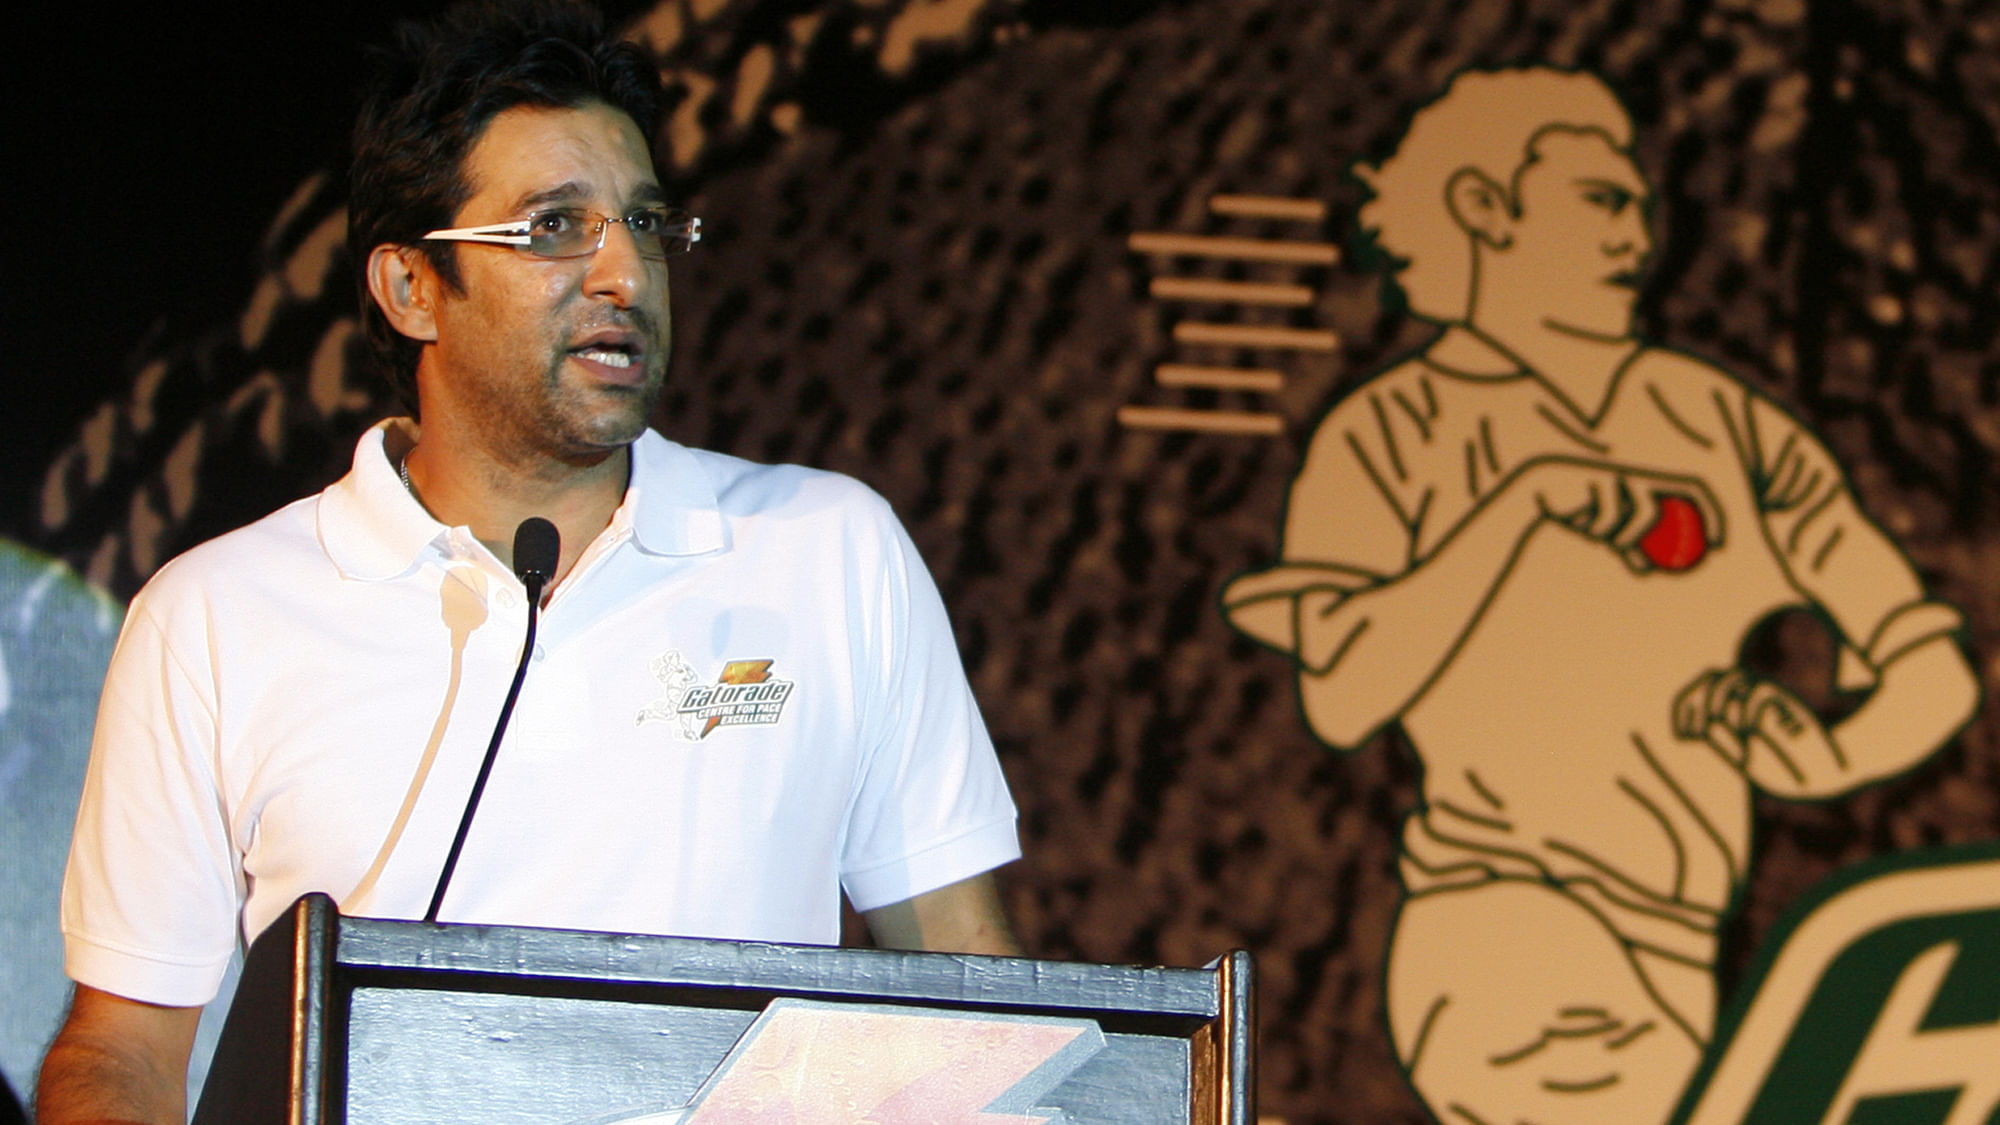 Wasim Akram has said foreign players tell him that the standard of bowling in the Pakistan Super League (PSL) is much better in comparison to that of the Indian Premier League (IPL).